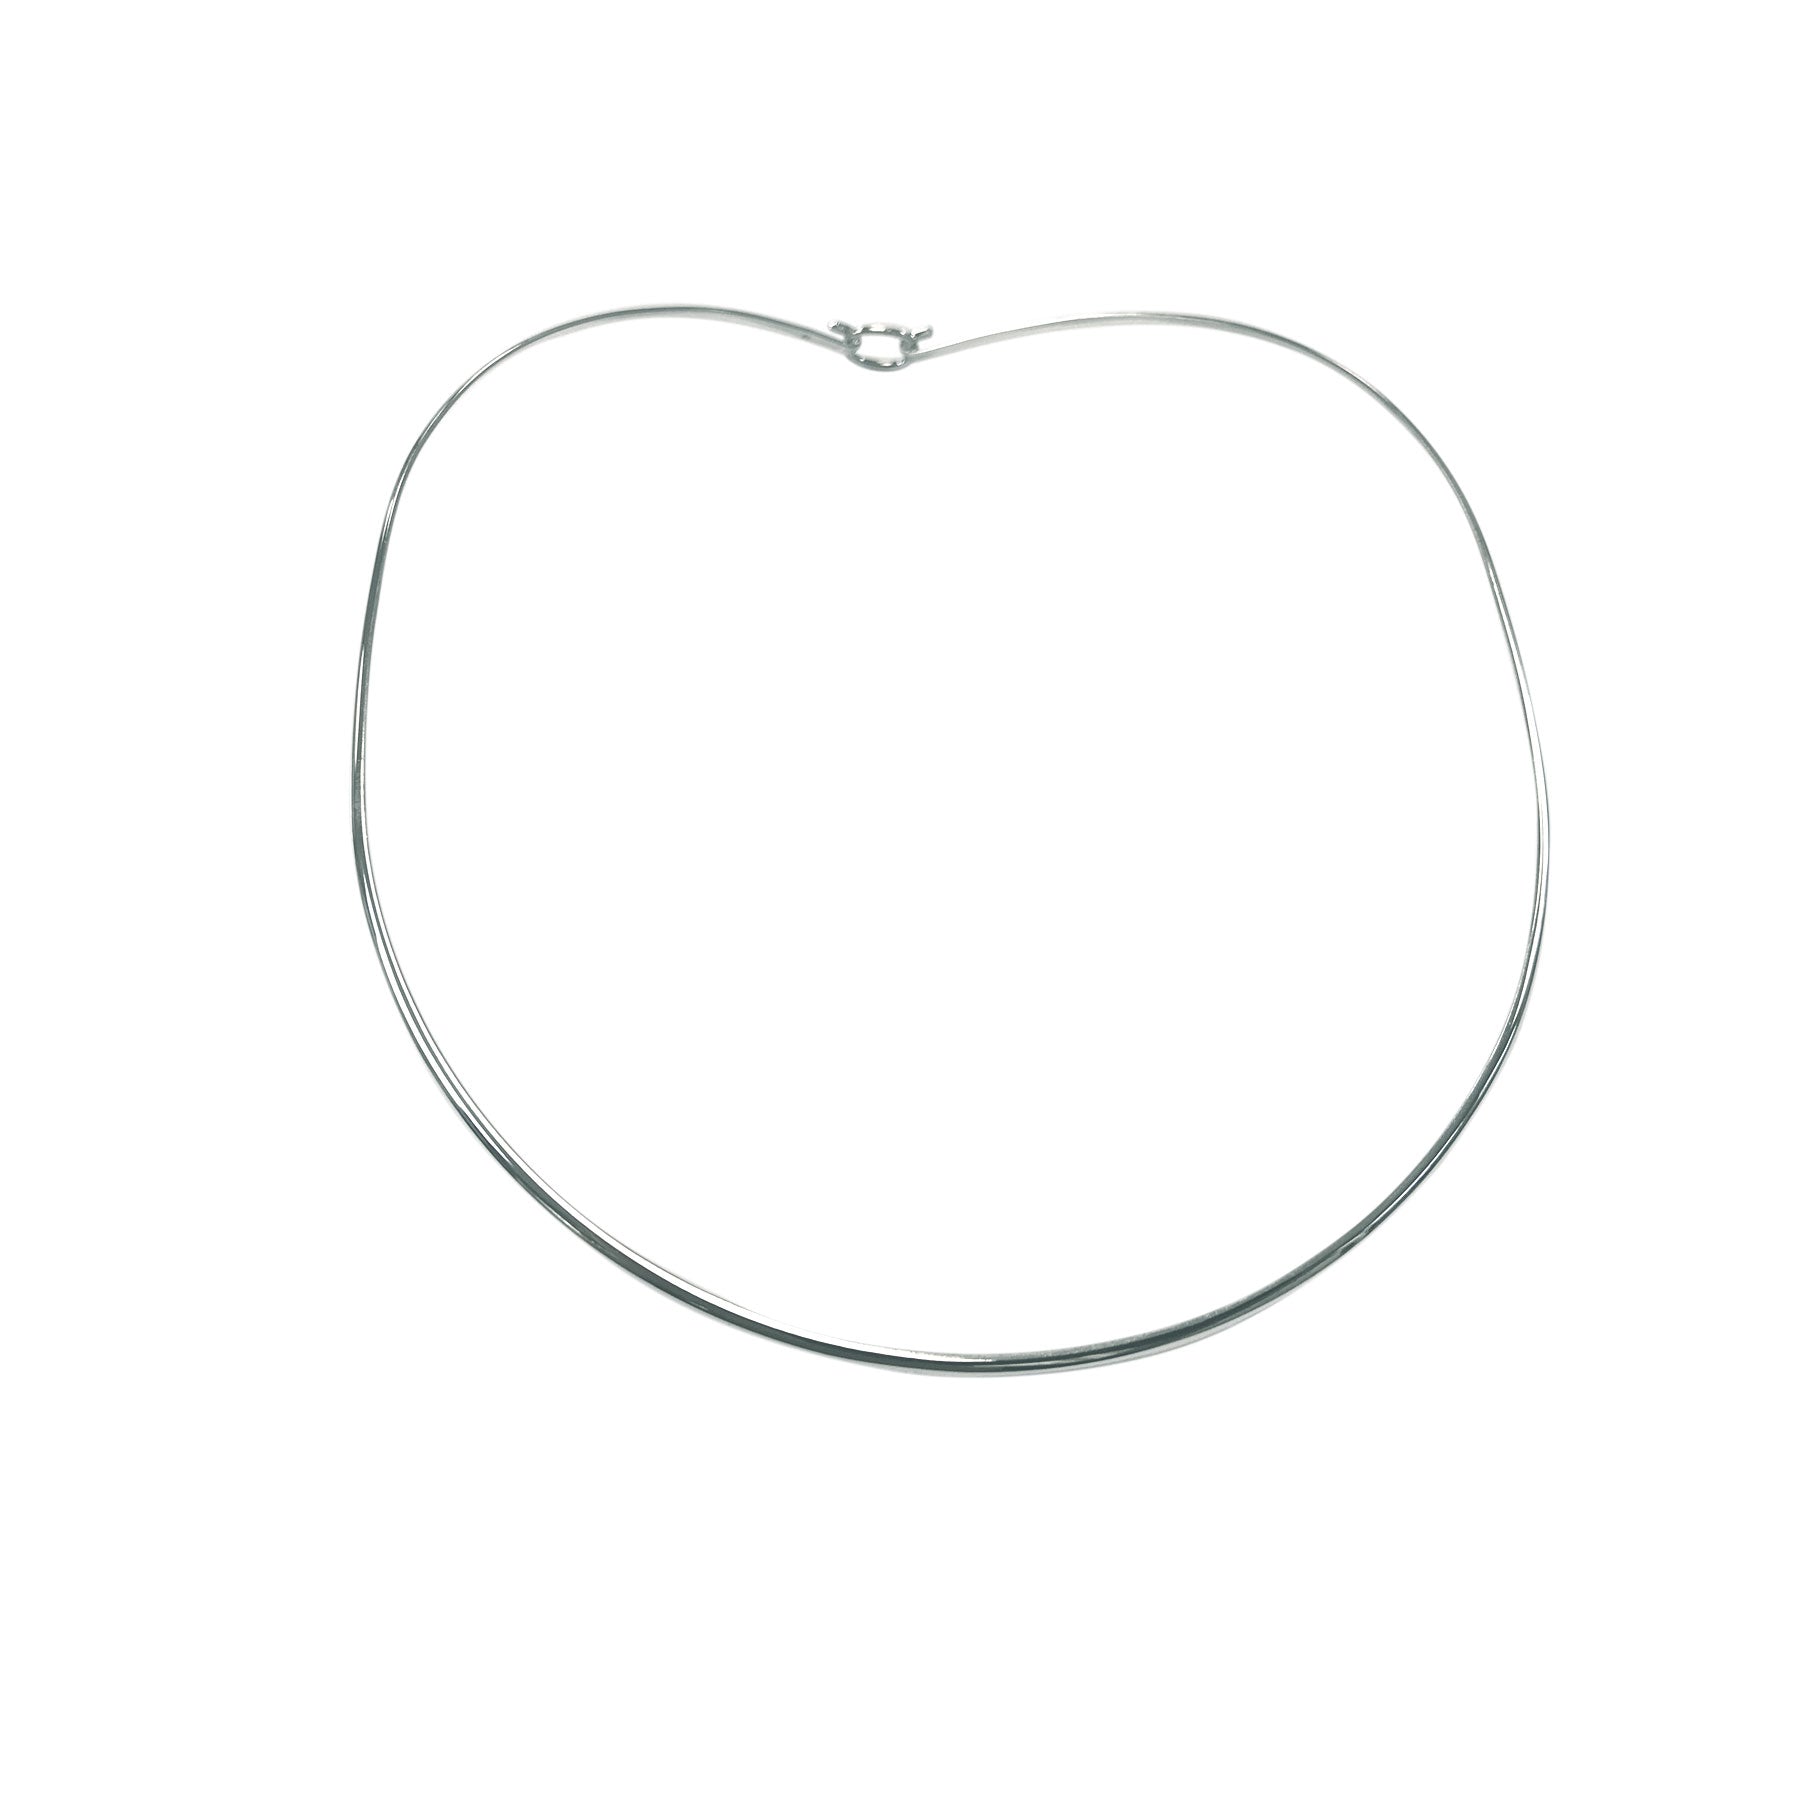 Sterling Silver Thin Collar Necklace with Latch